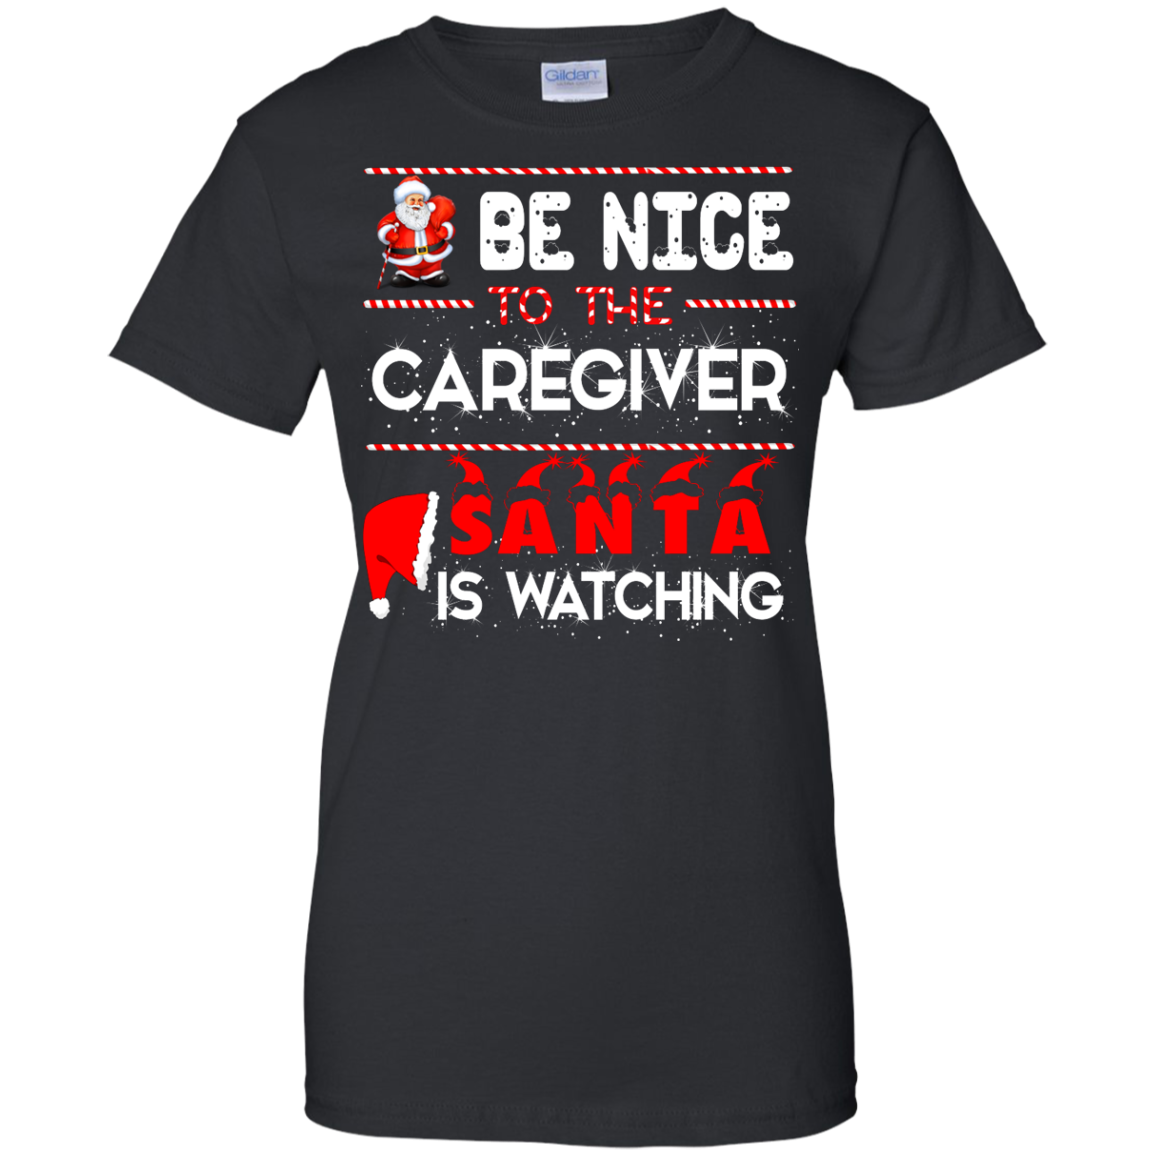 Be Nice To The Caregiver Santa Is Watching Shirt - ifrogtees